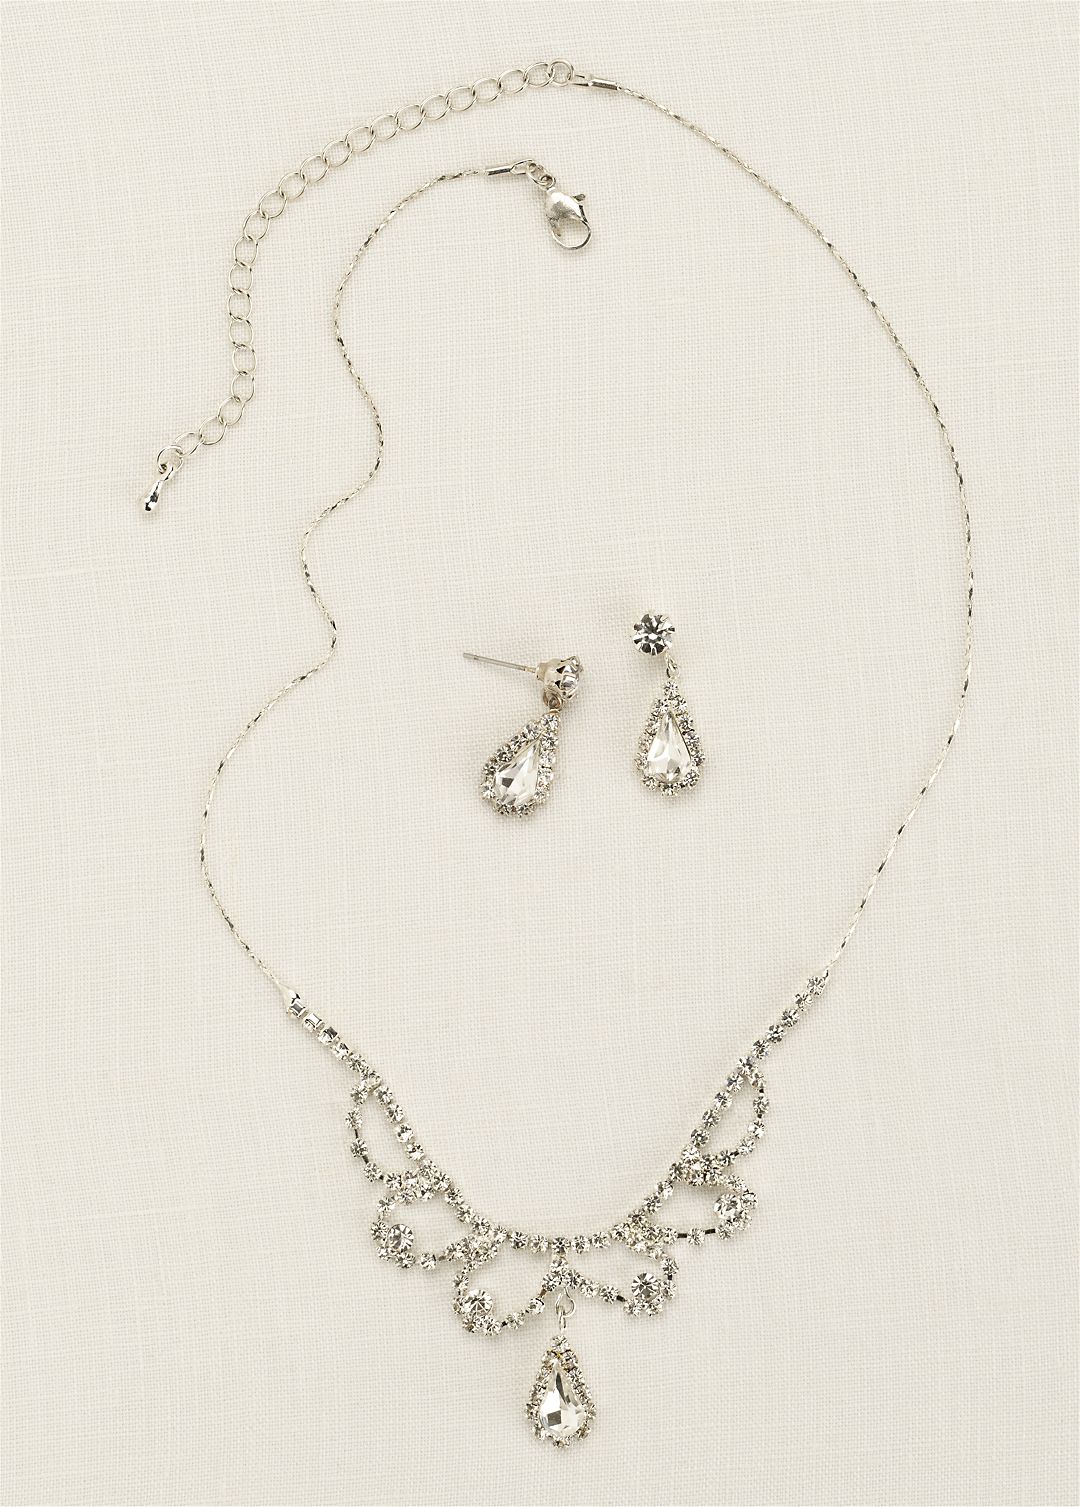 Scalloped Necklace with Pear Shaped Drop Earrings Image 1